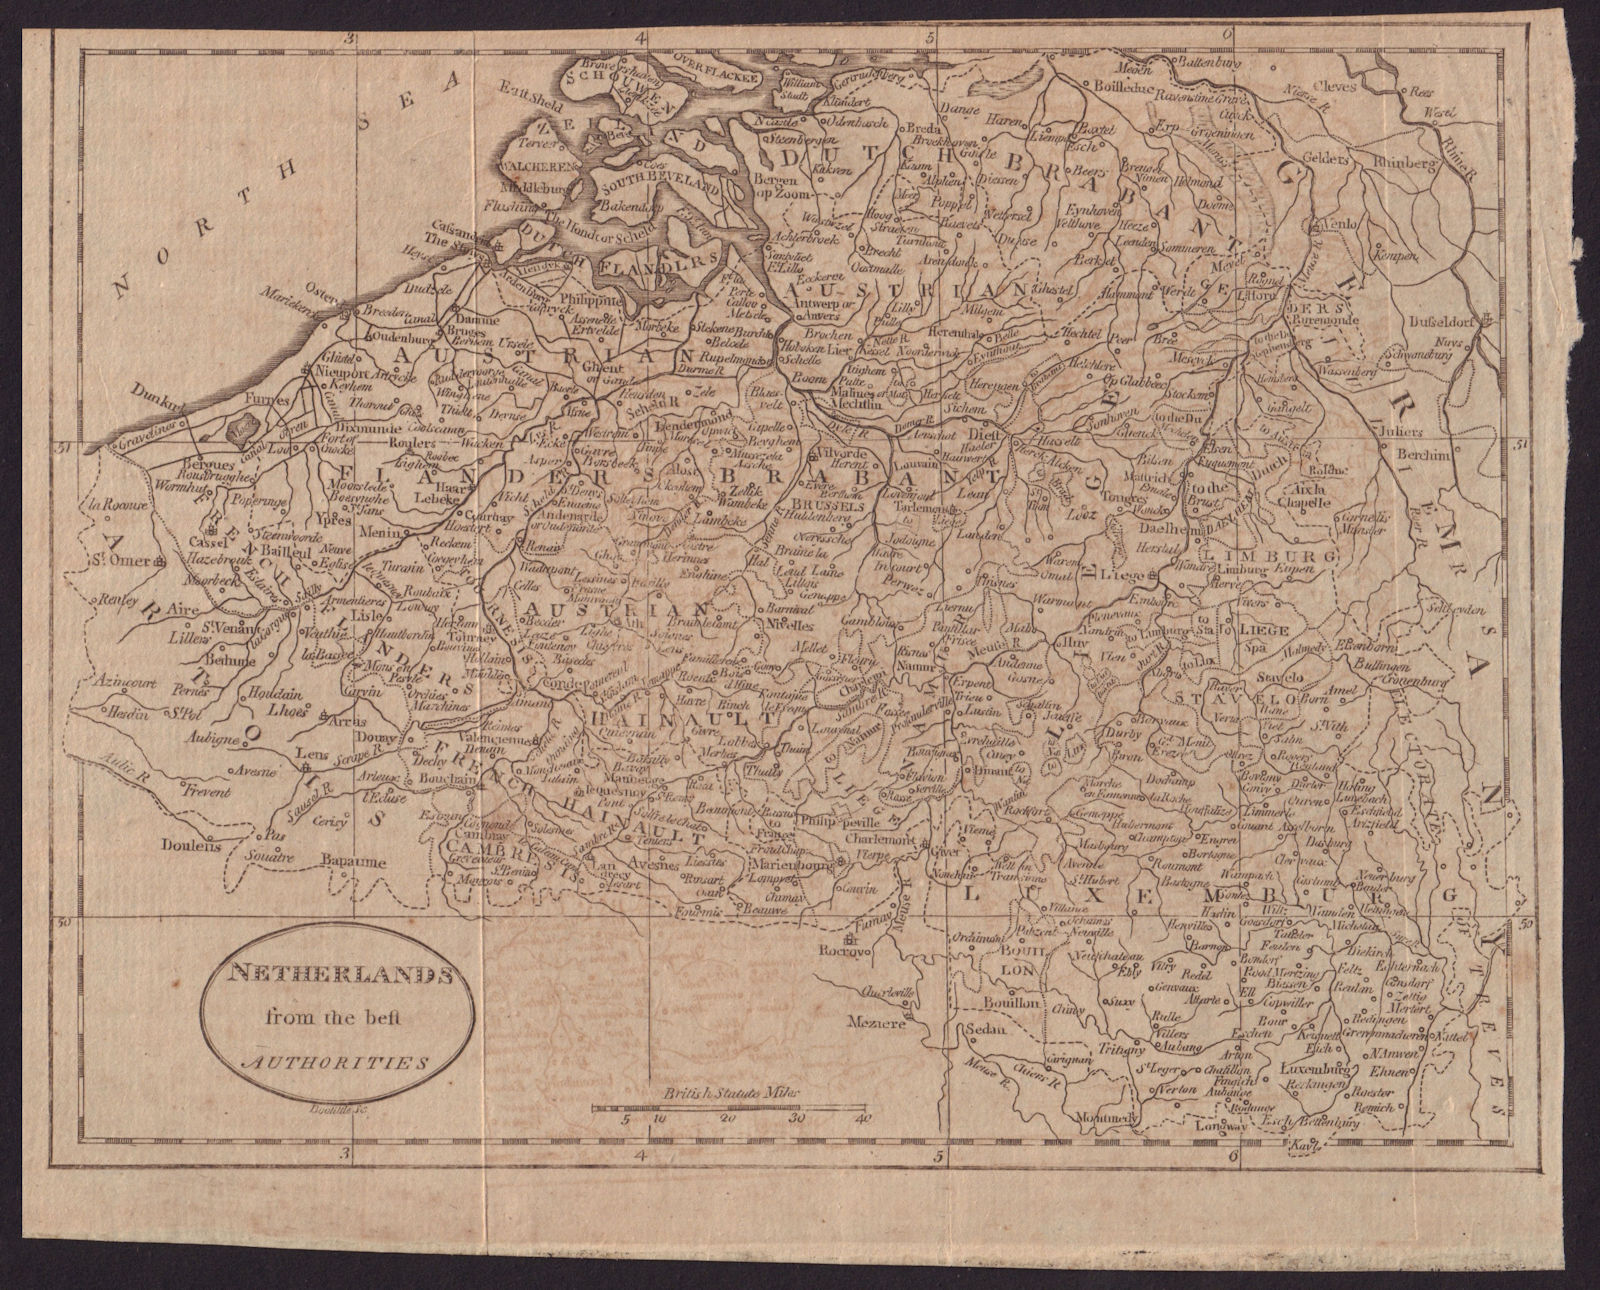 Belgium & Luxembourg. "Netherlands from the best authorities". MORSE 1796 map